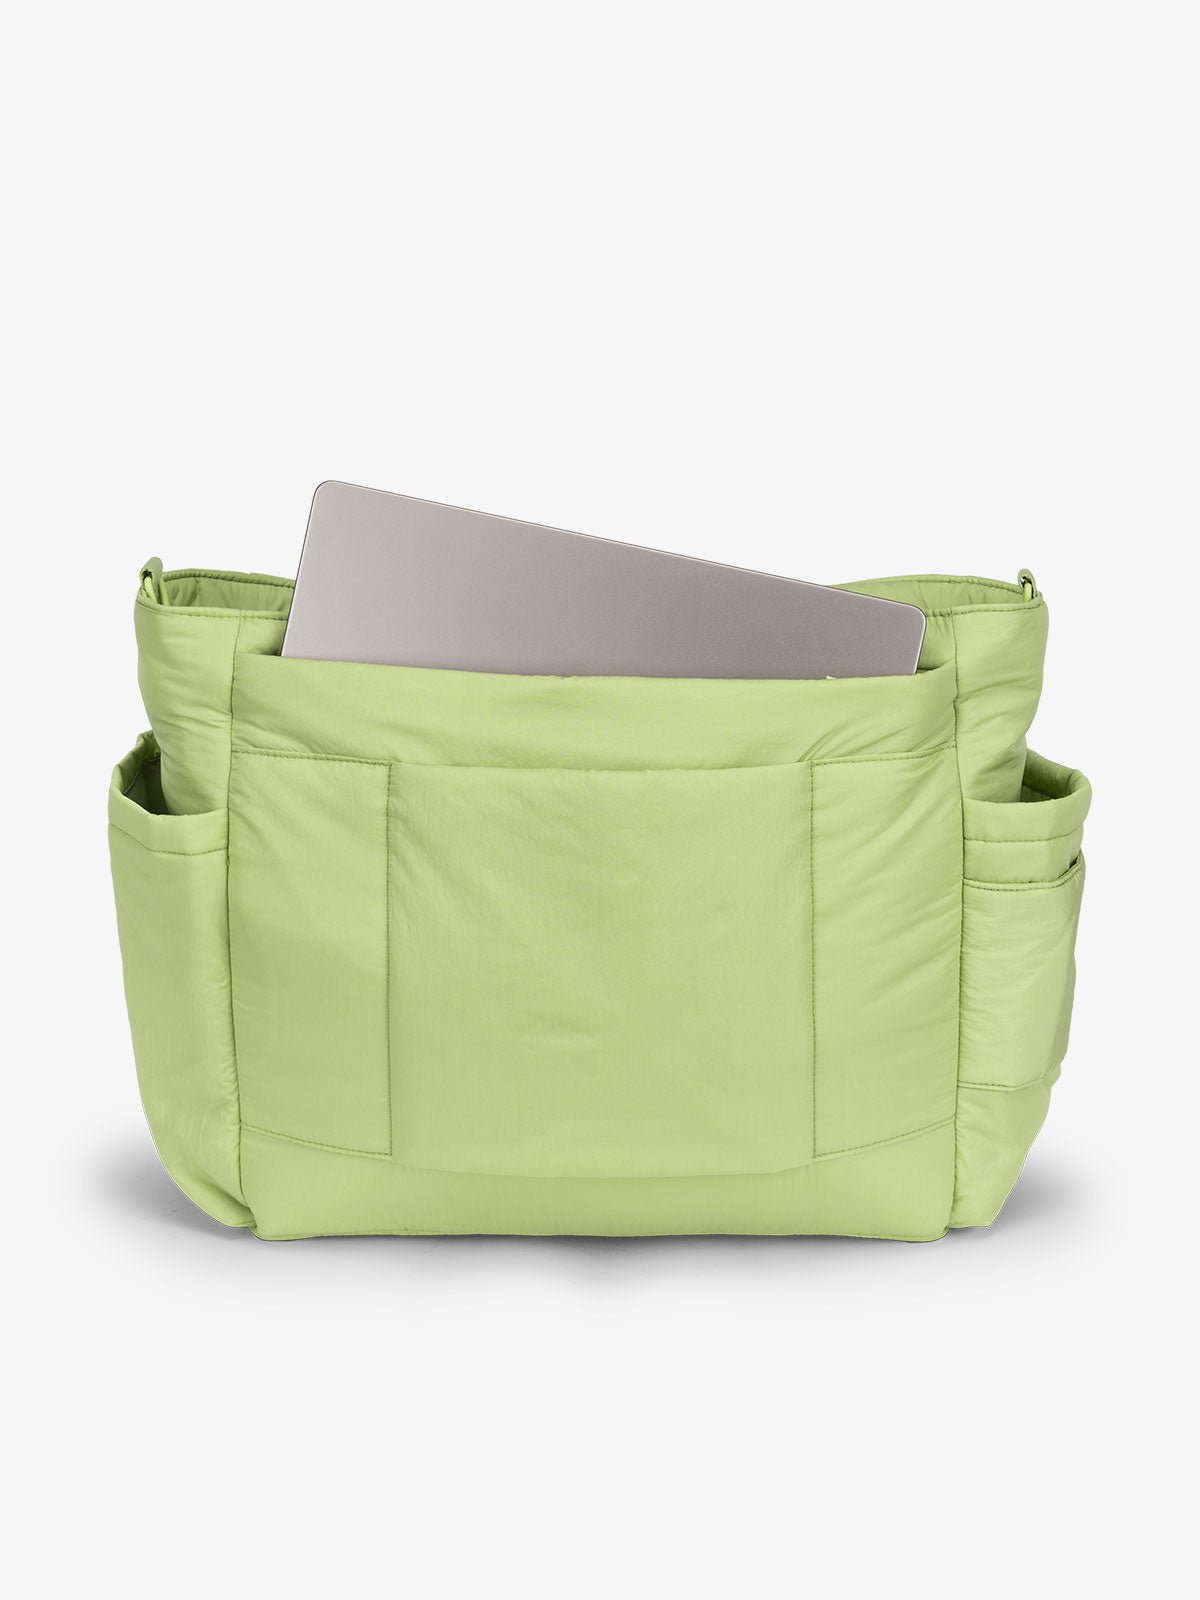 Lime CALPAK laptop diaper tote bag with multiple insulated exterior bottle pockets and a spacious pocket for laptop or ipad